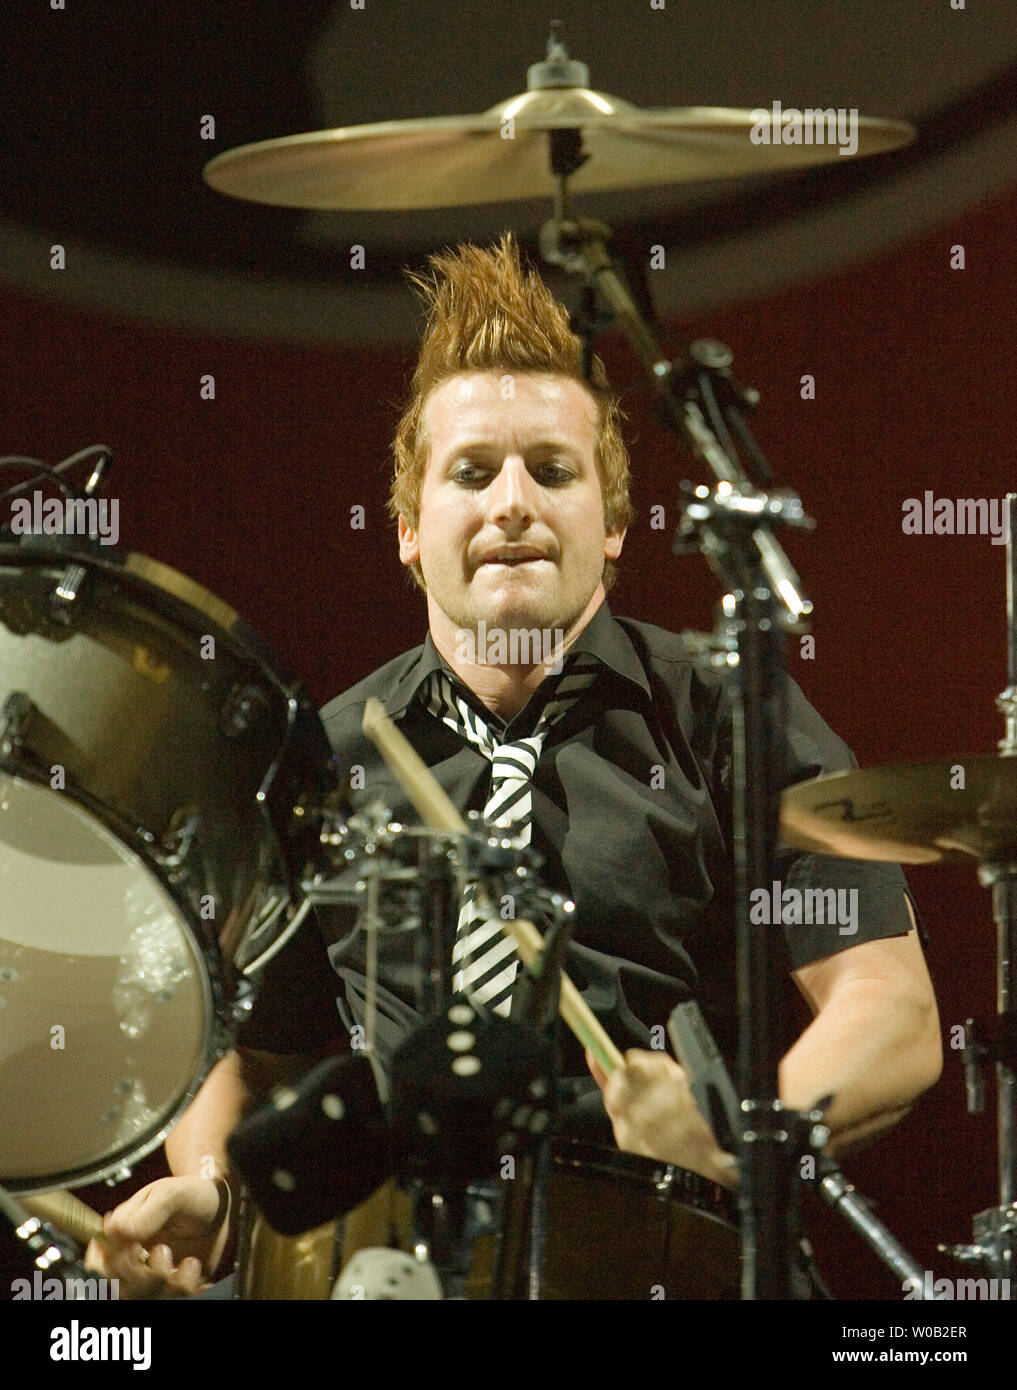 Drummer Tre Cool of the band Green Day performs at a sold out GM Place in Vancouver, British Columbia, September 27, 2005.  (UPI Photo/Heinz Ruckemann) Stock Photo